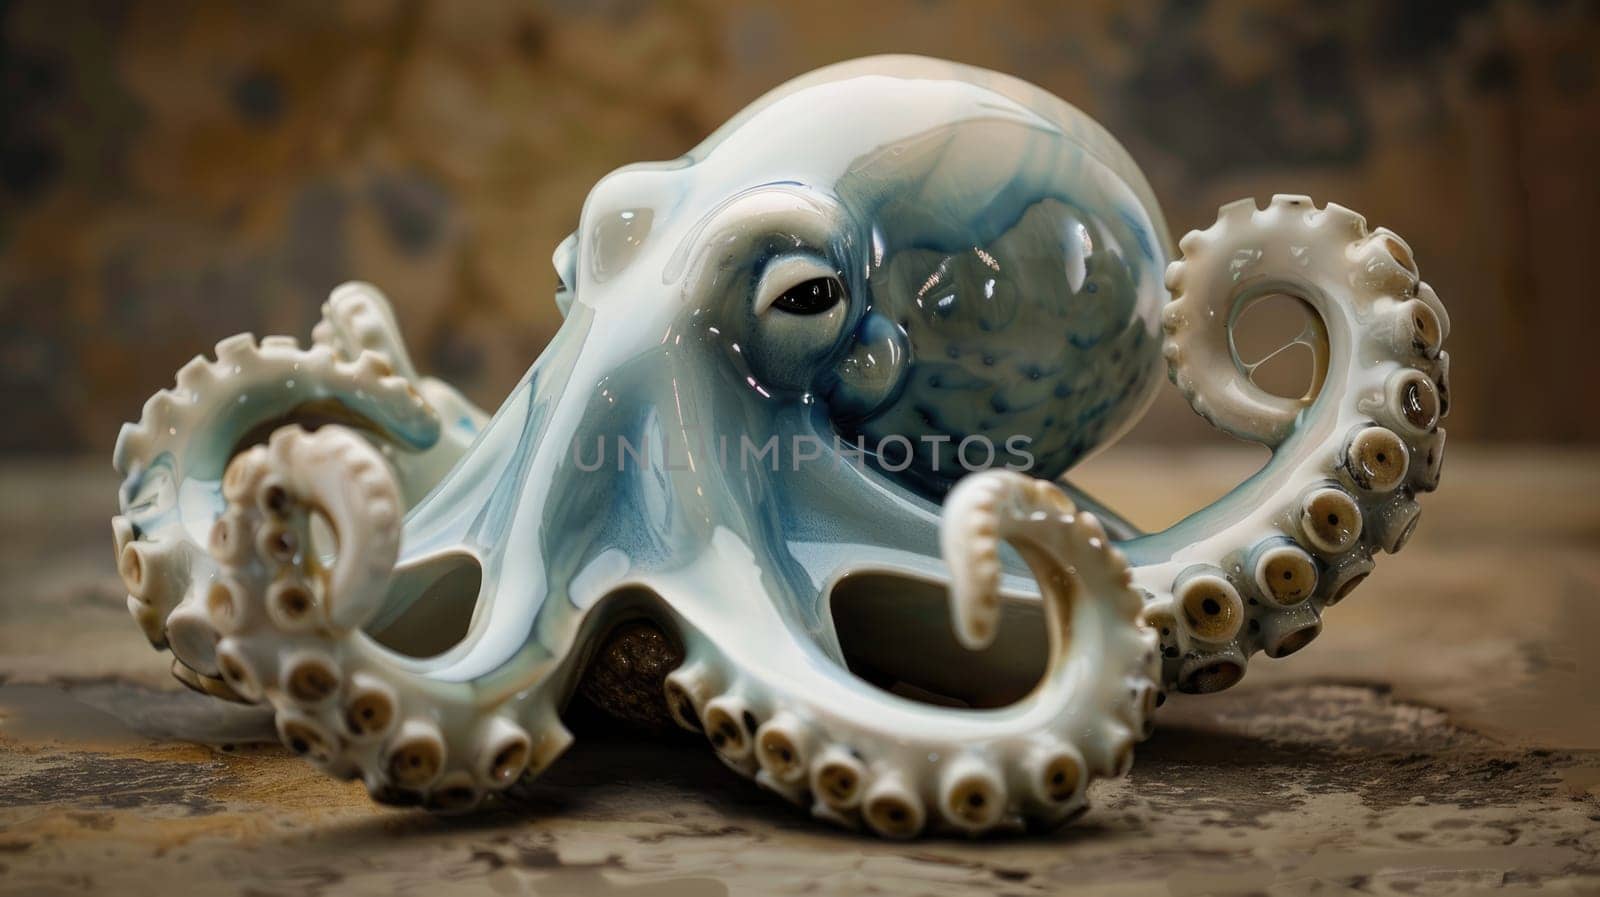 Porcelain figurine of an octopus, in blue and pearlescent tones by natali_brill